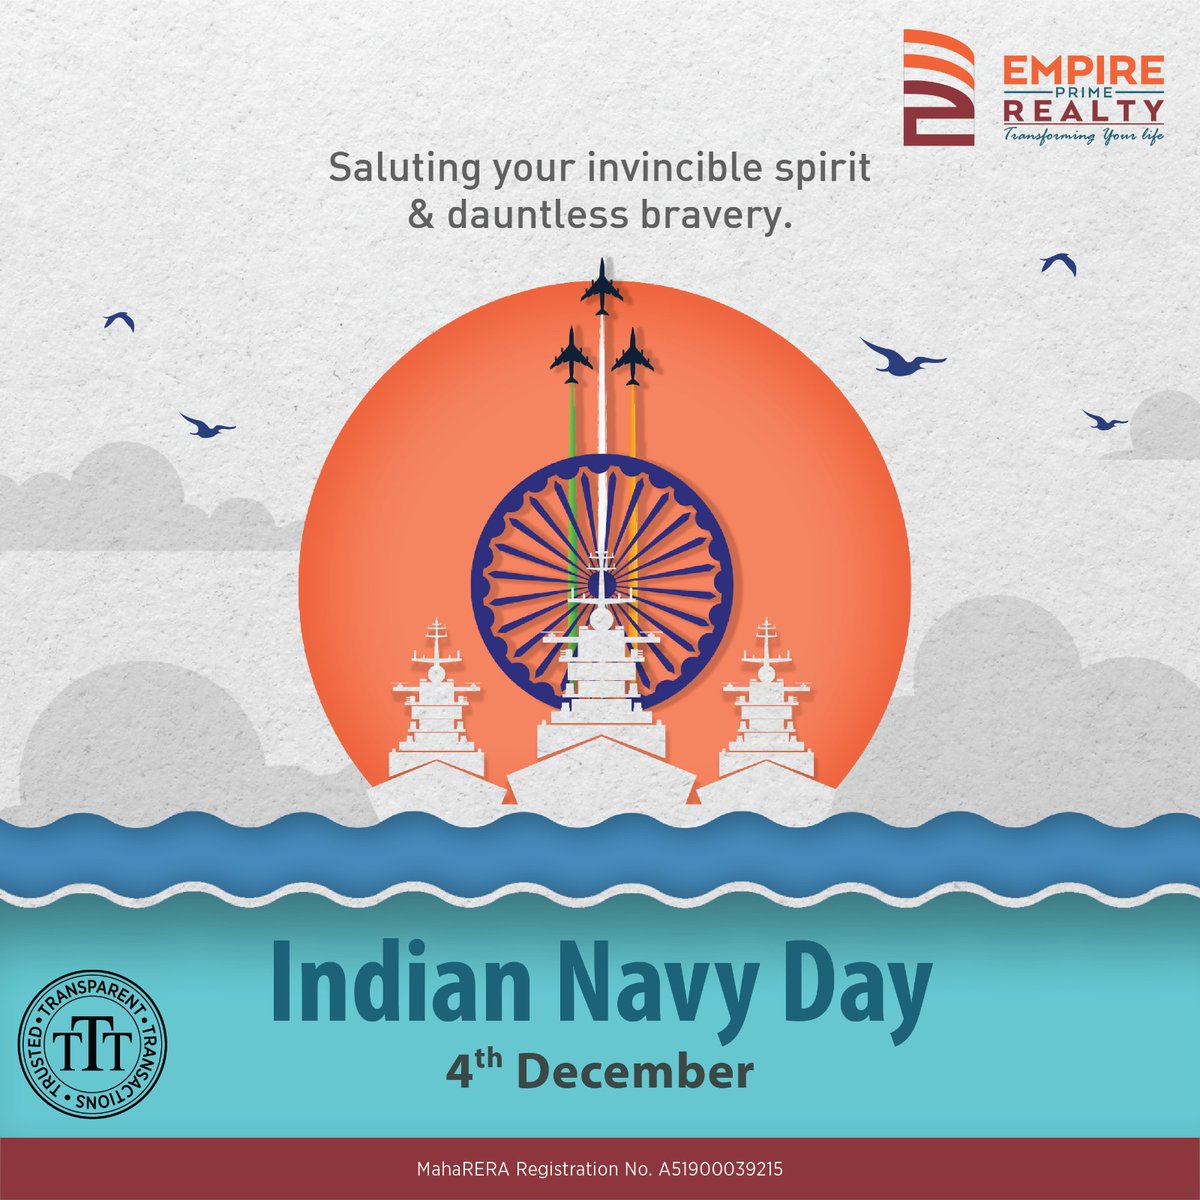 On Navy Day, we salute the bravery, dedication, and indomitable spirit of our naval forces. Thank you for safeguarding our seas and securing our nation. #Navyday #empireprimerealty